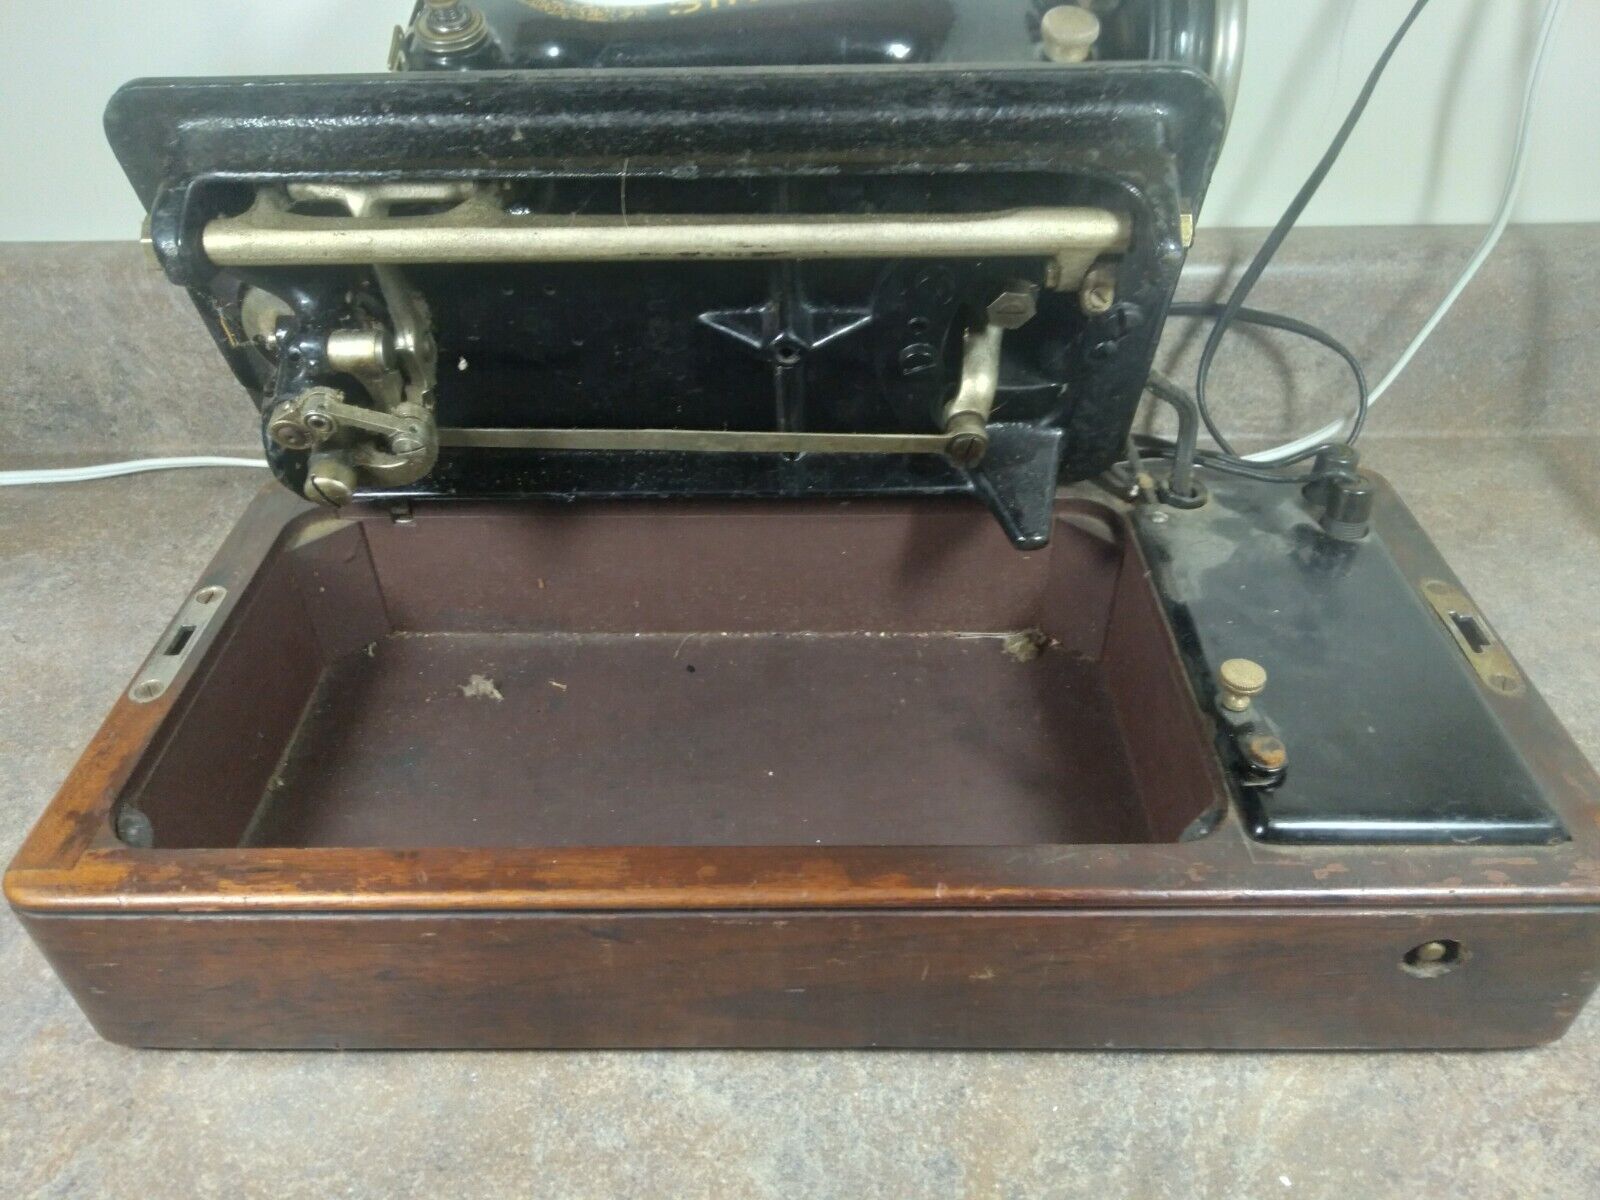 Vintage Singer Sewing Machine Model 99 with Wooden Case